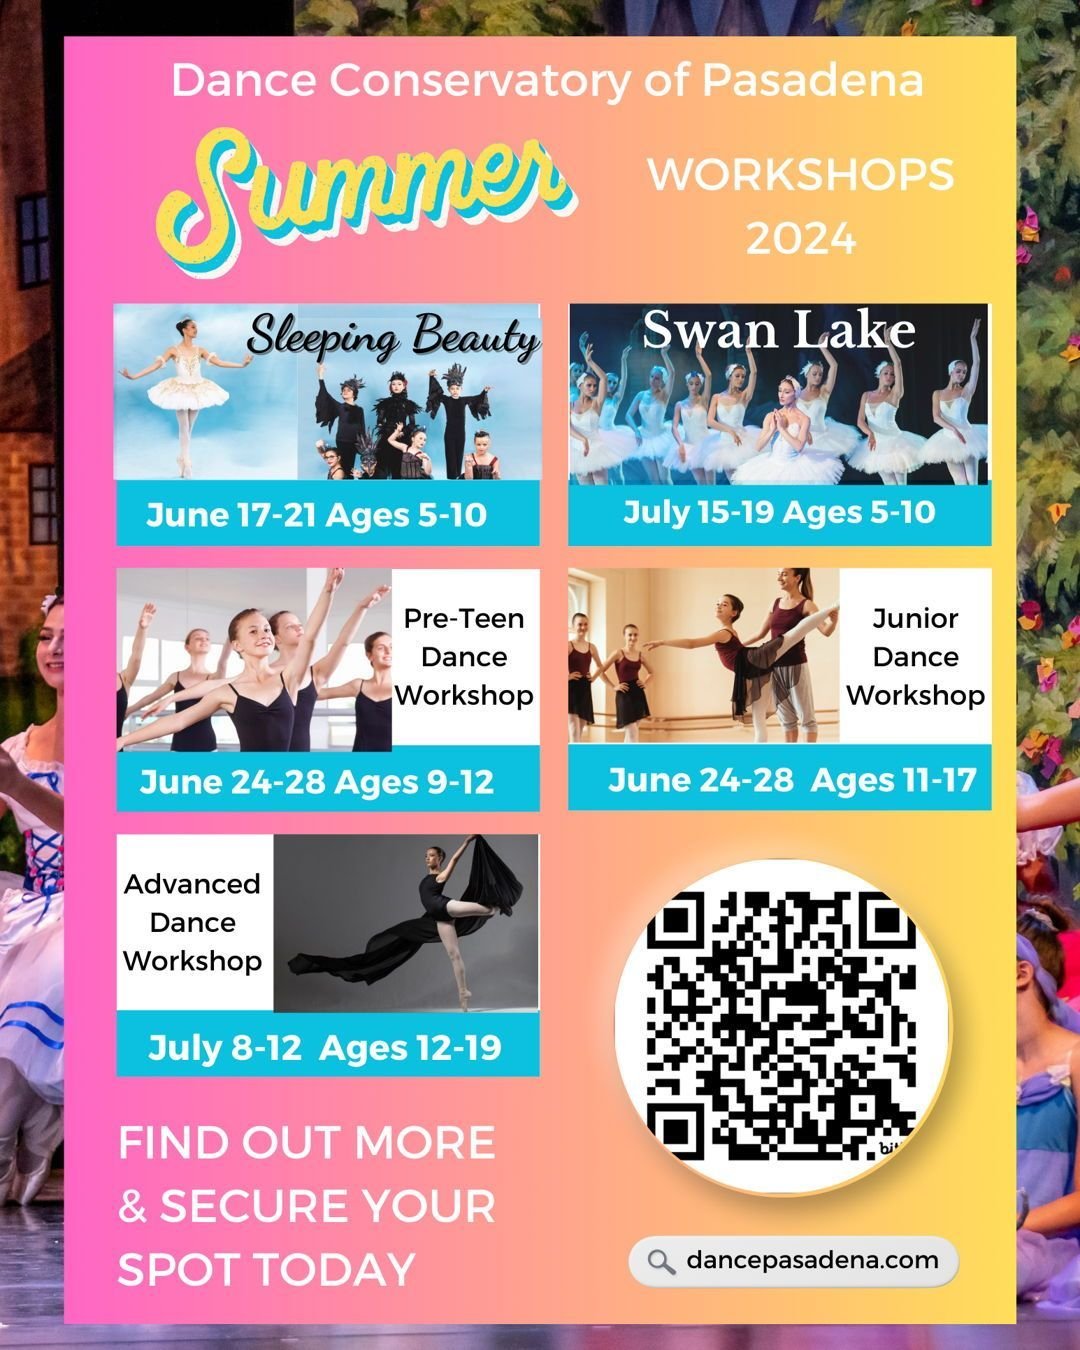 Come Dance with DCP through Summer! 
Registration for Summer Camps and Dance Workshops is now open. Secure your spot with our early bird special! Summer classes start June 17th 😀